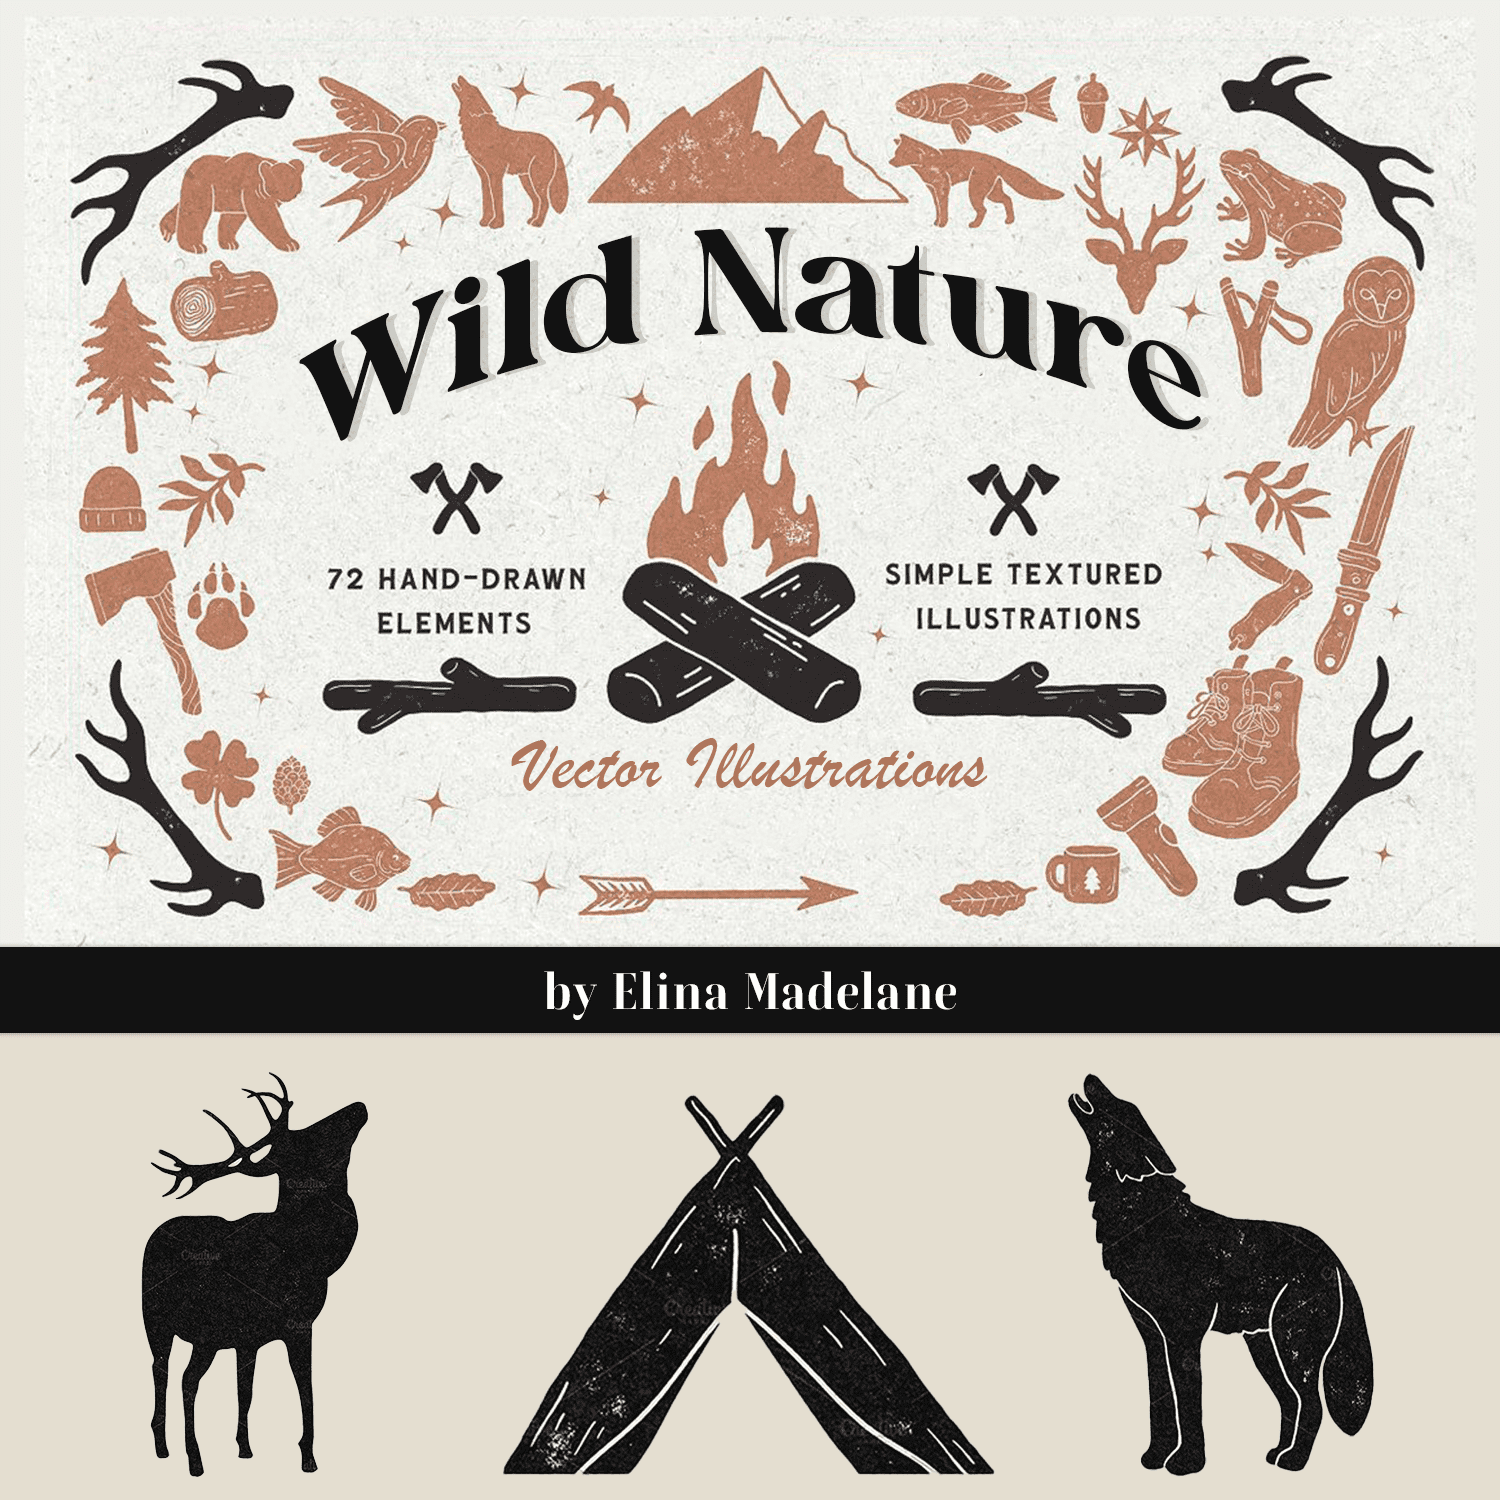 Wild Nature Vector Illustrations cover.